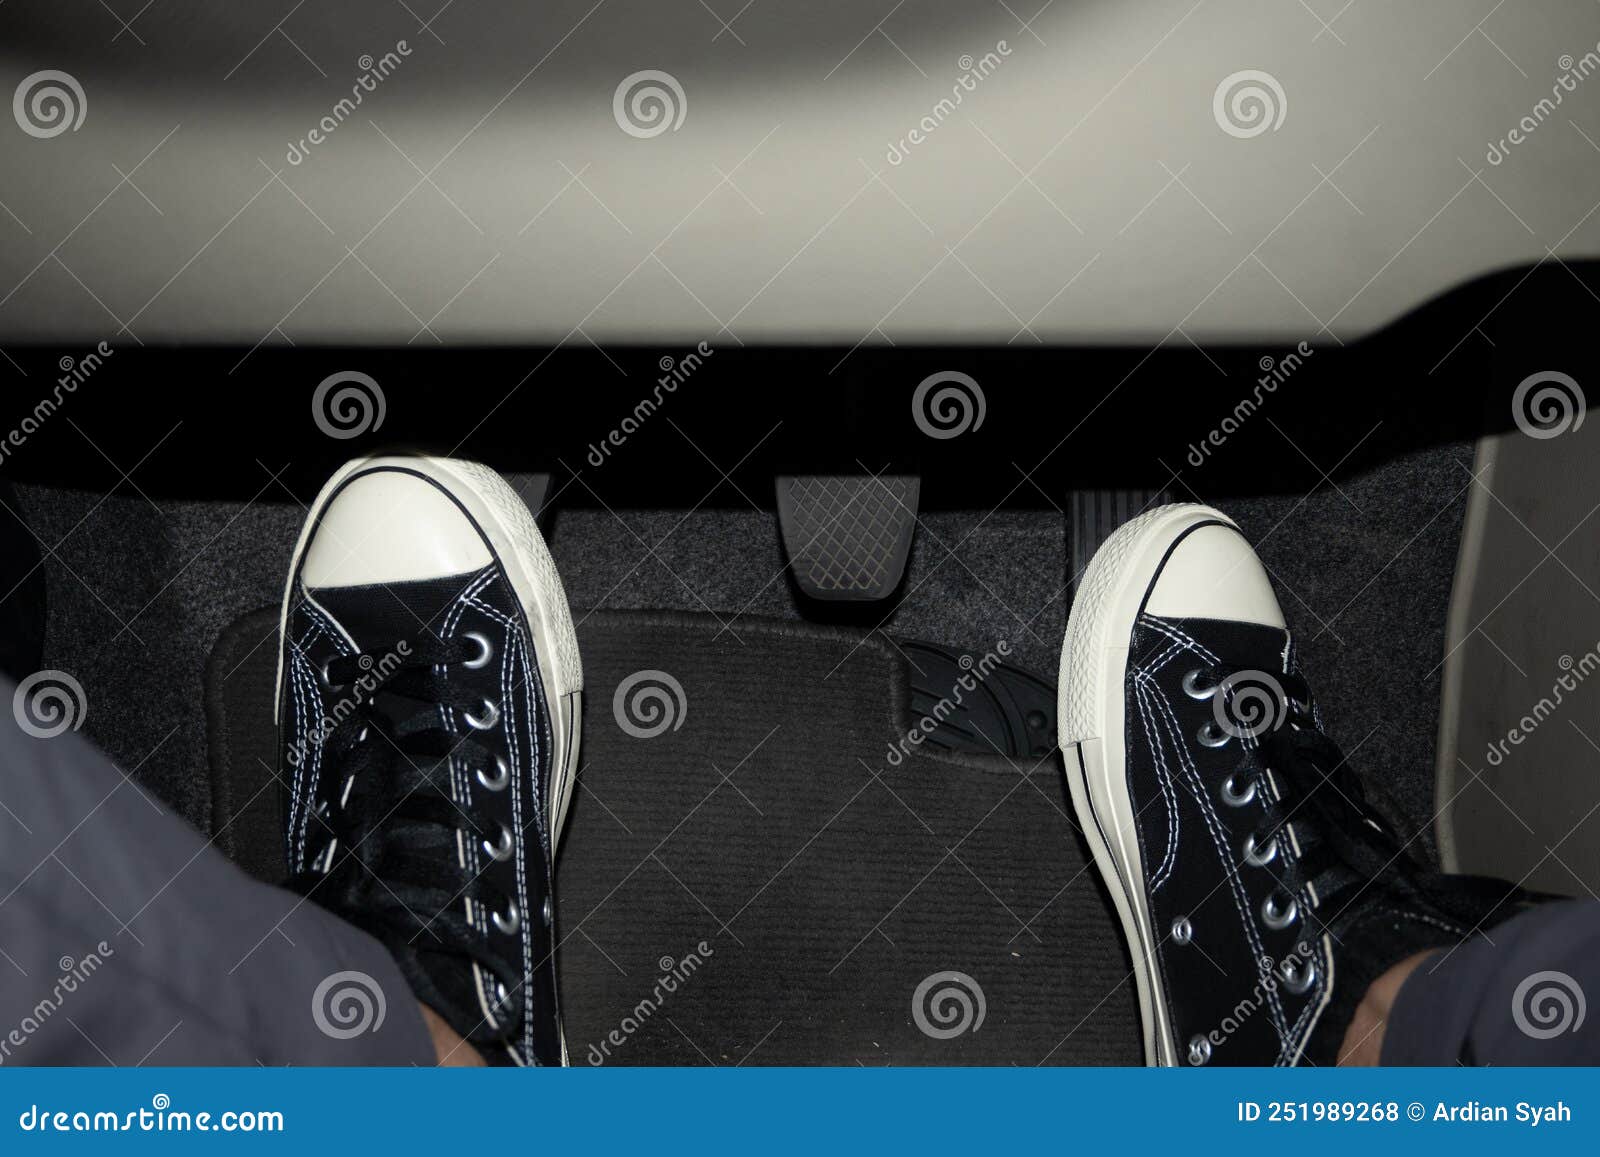 3+ Thousand Clutch Foot Royalty-Free Images, Stock Photos